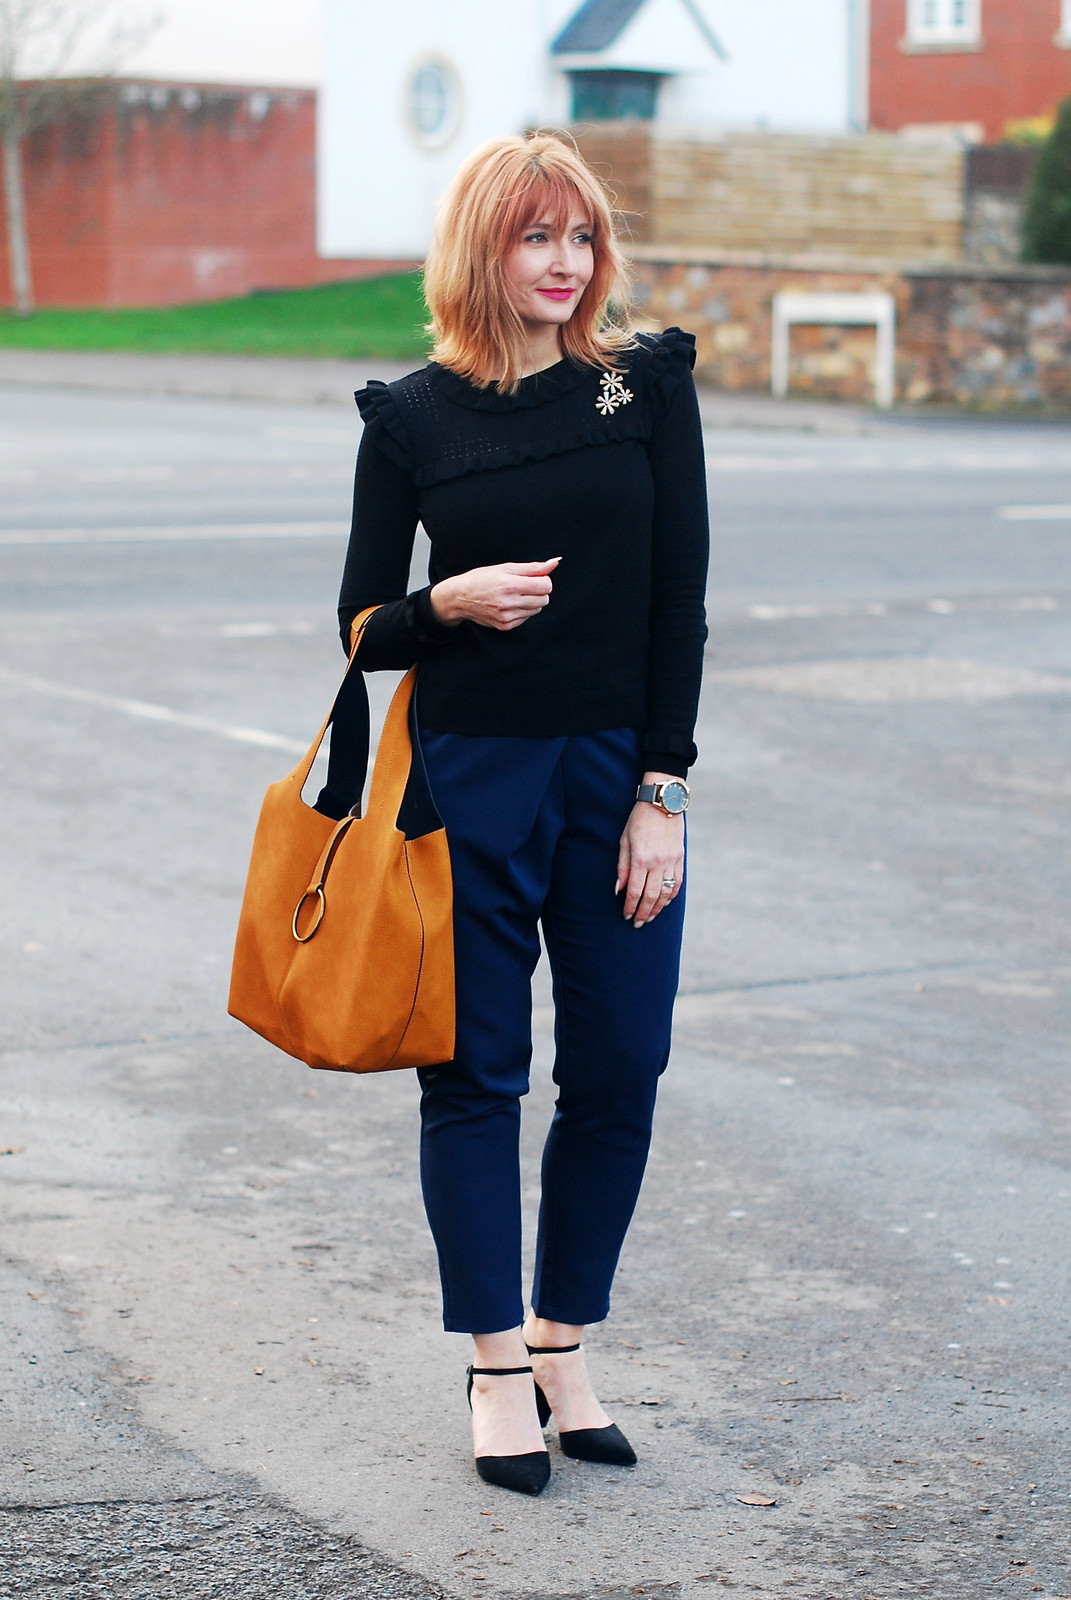 Navy and black together: Navy peg leg trousers black ruffled sweater black pointed heels mustard bucket bag | Not Dressed As Lamb, over 40 style